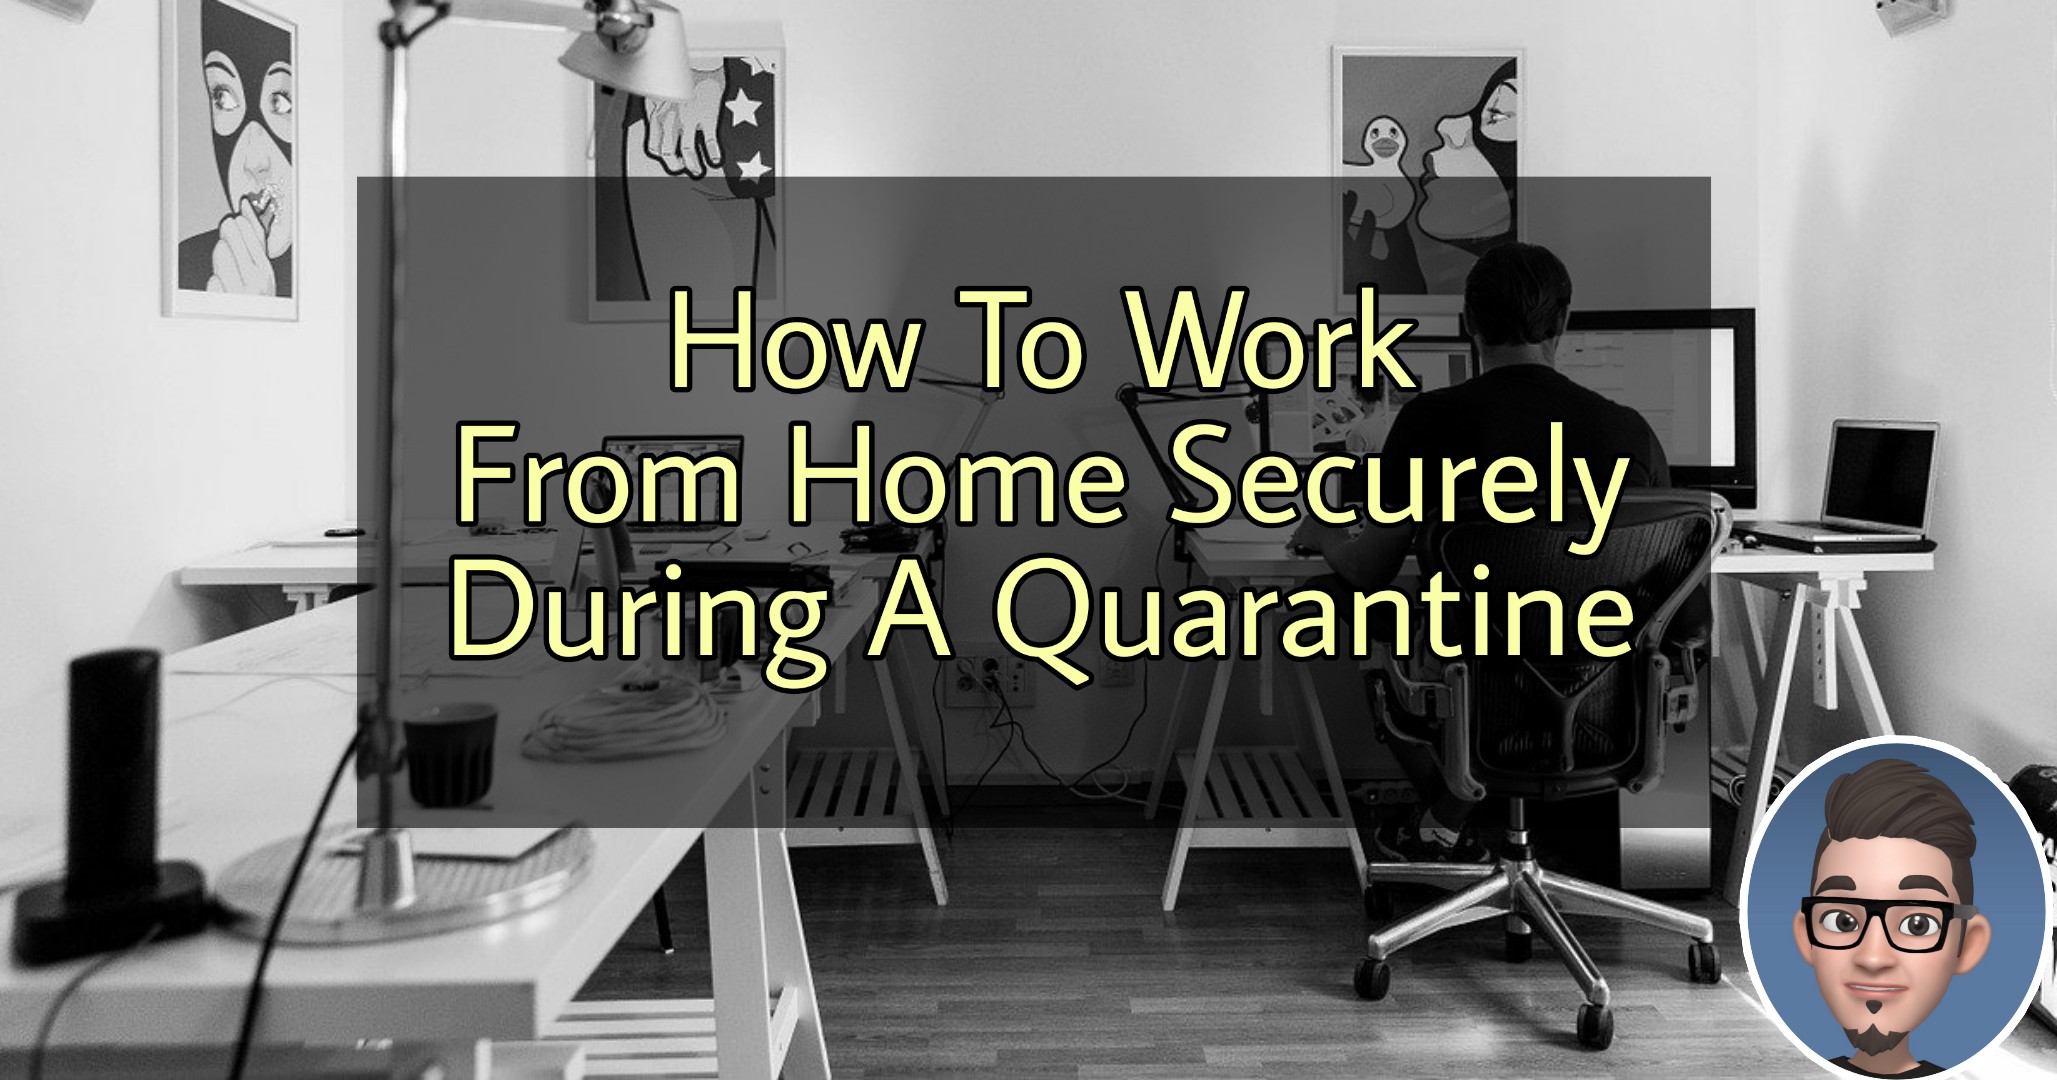 How To Work From Home Securely During A Quarantine